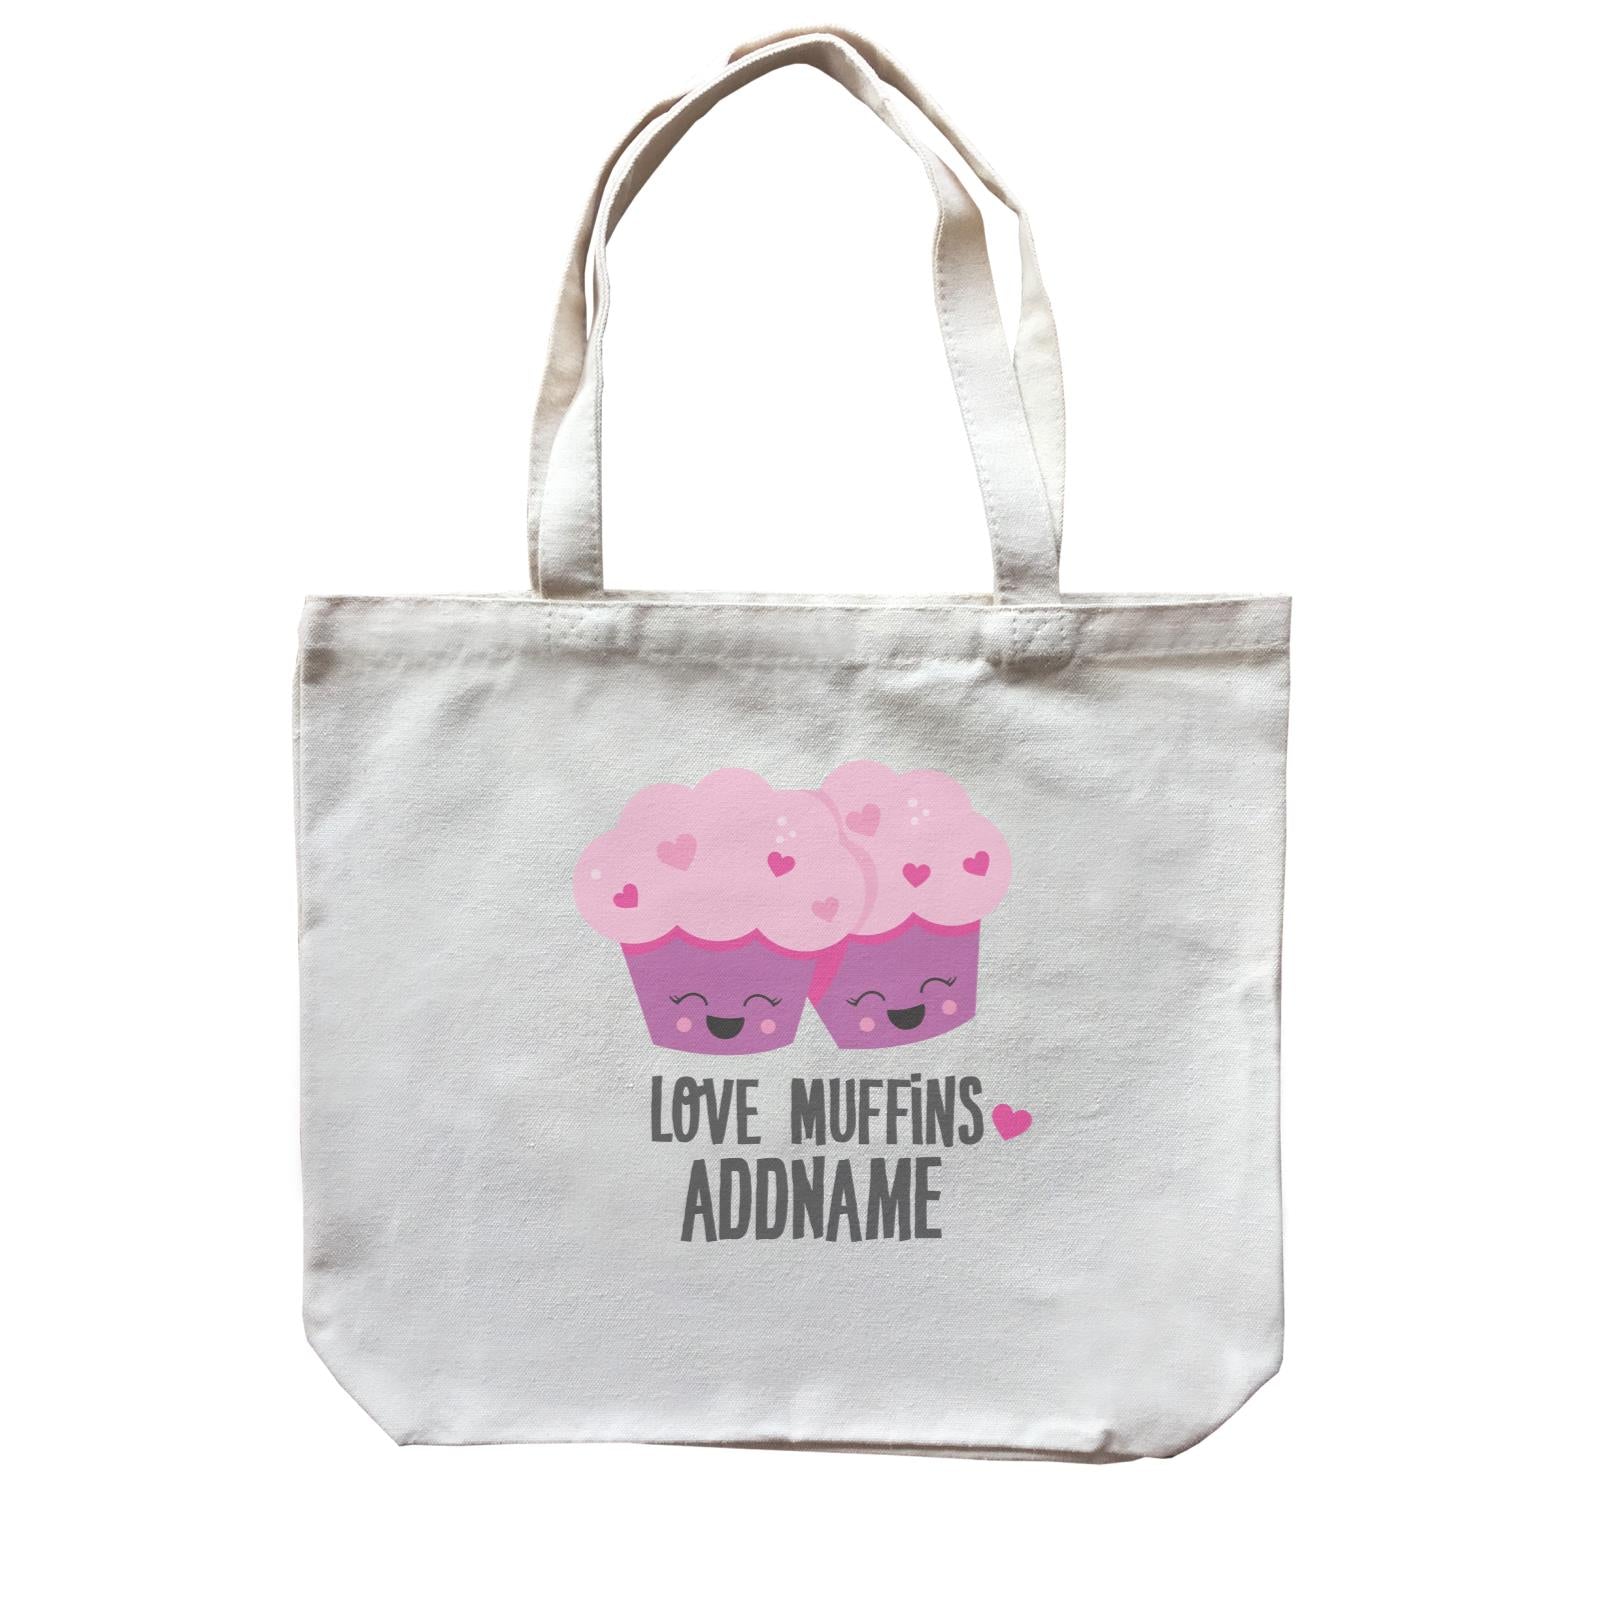 Love Food Puns Love Muffins Addname Canvas Bag